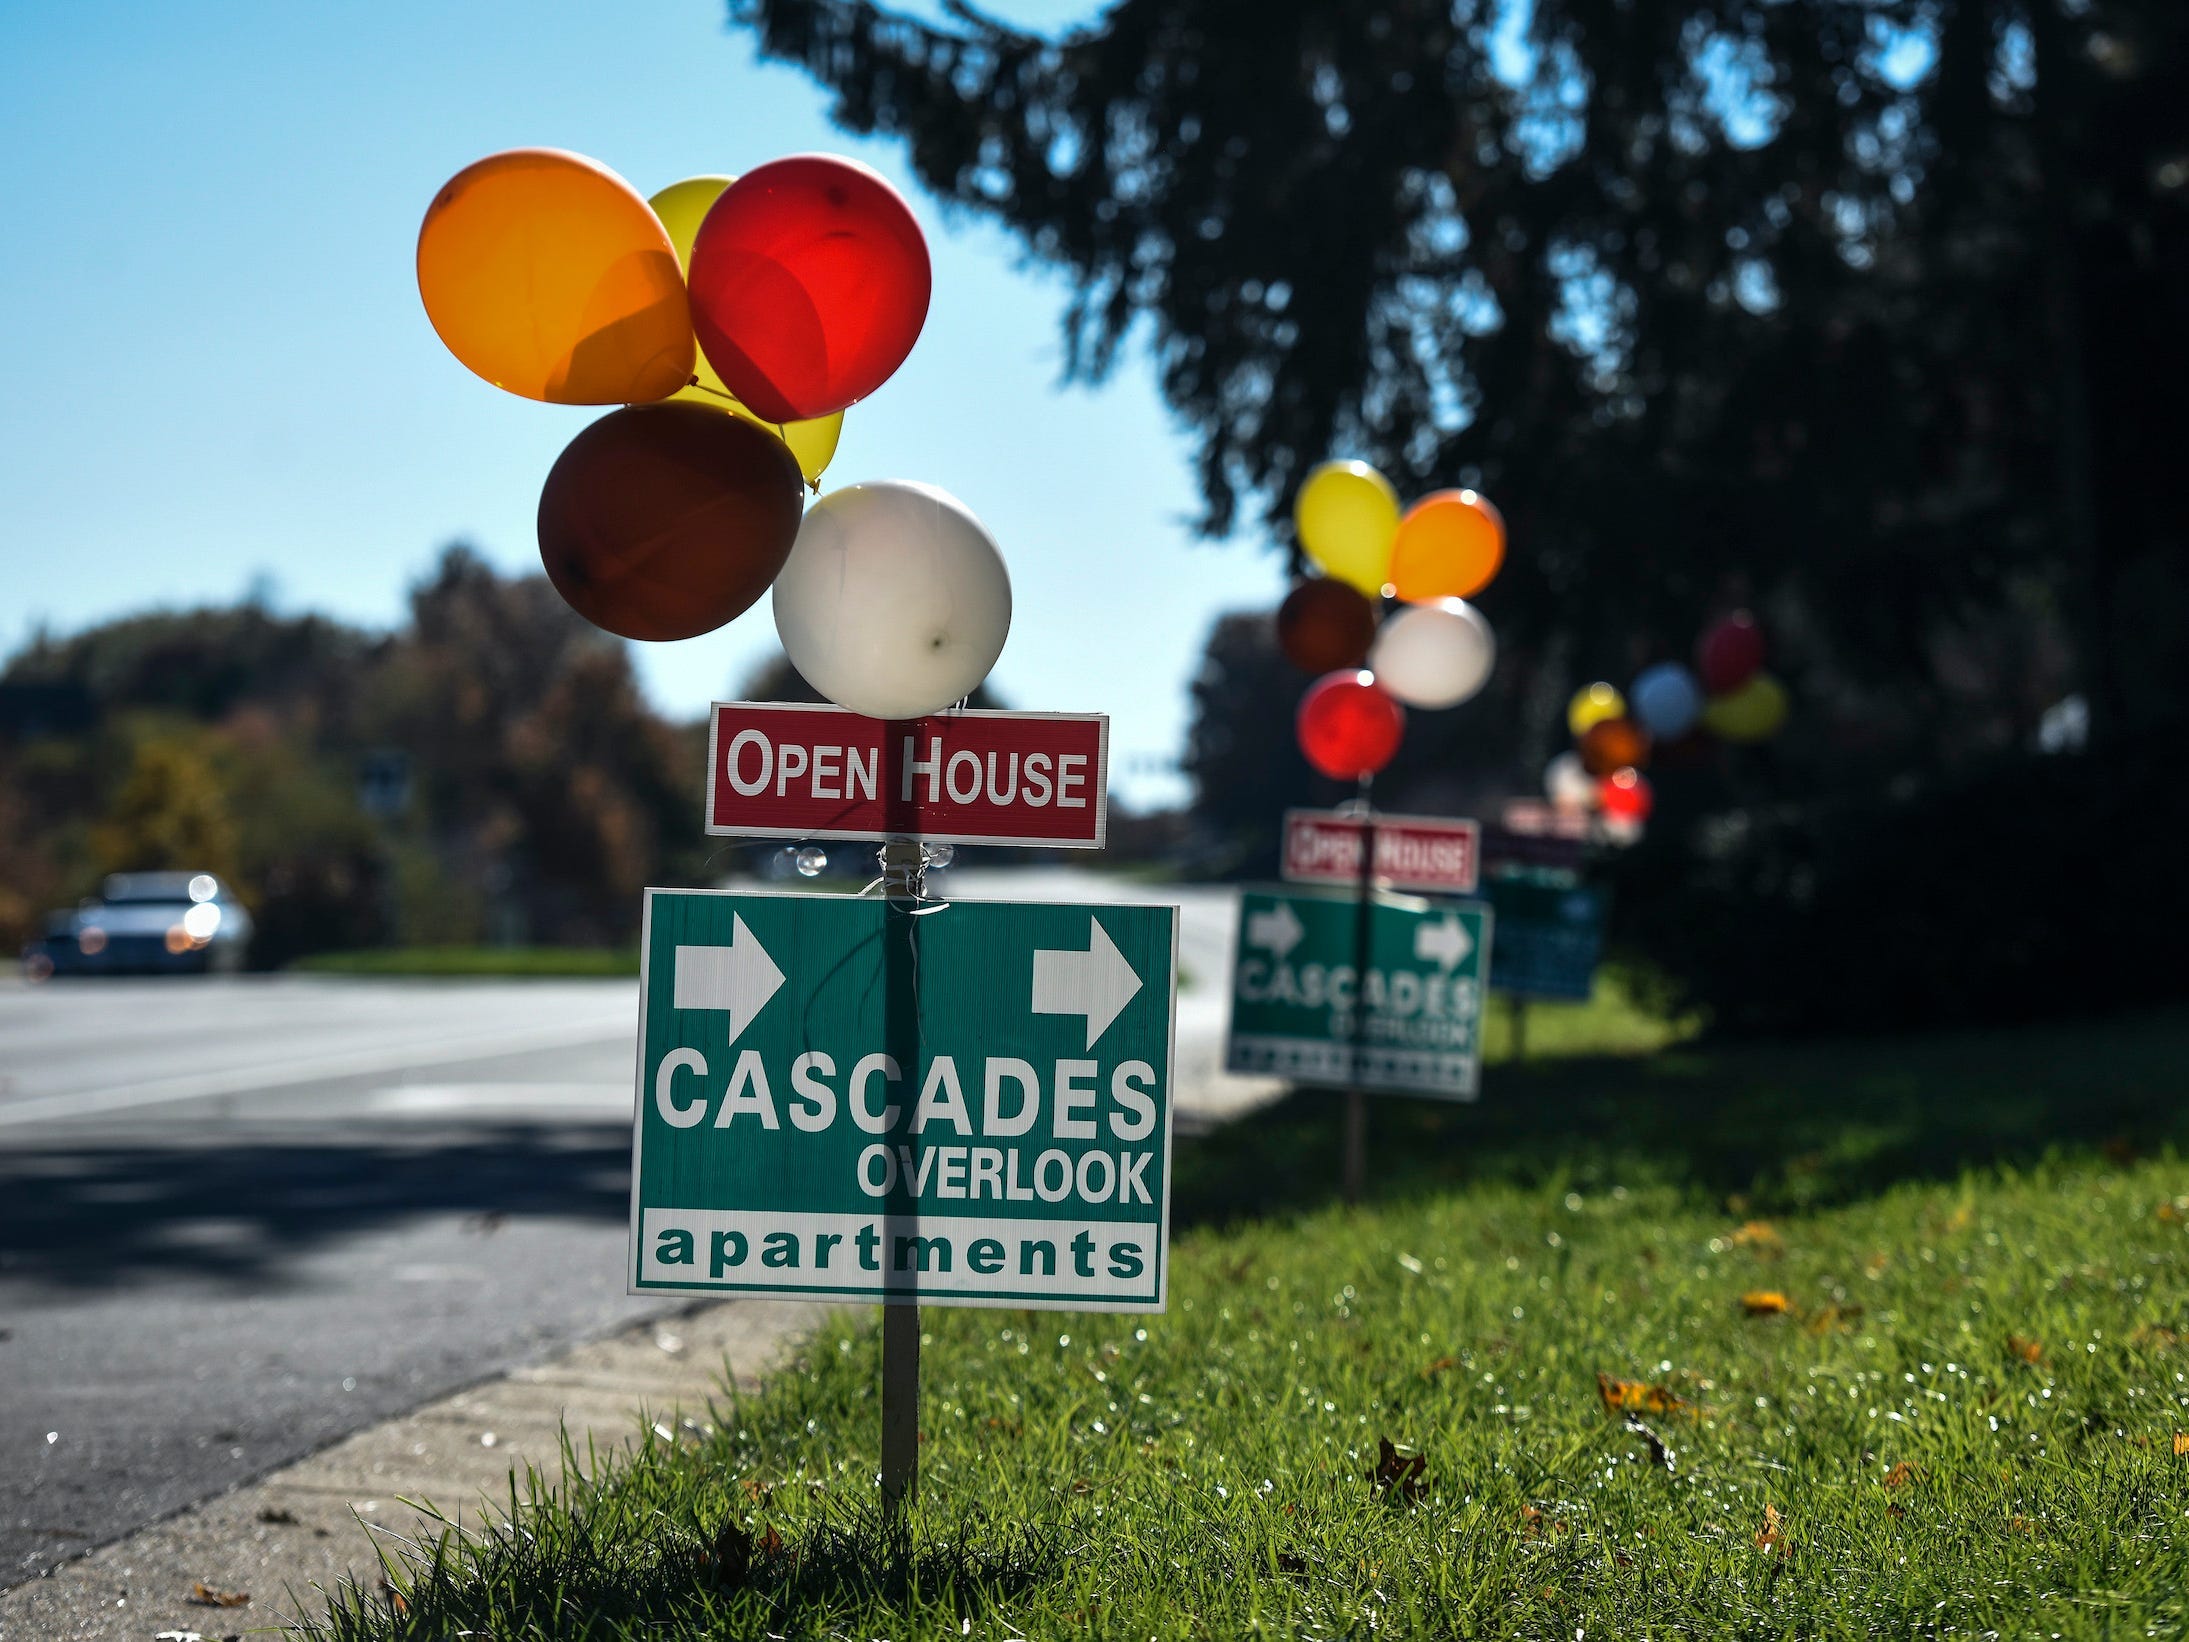 Open house signs with balloons